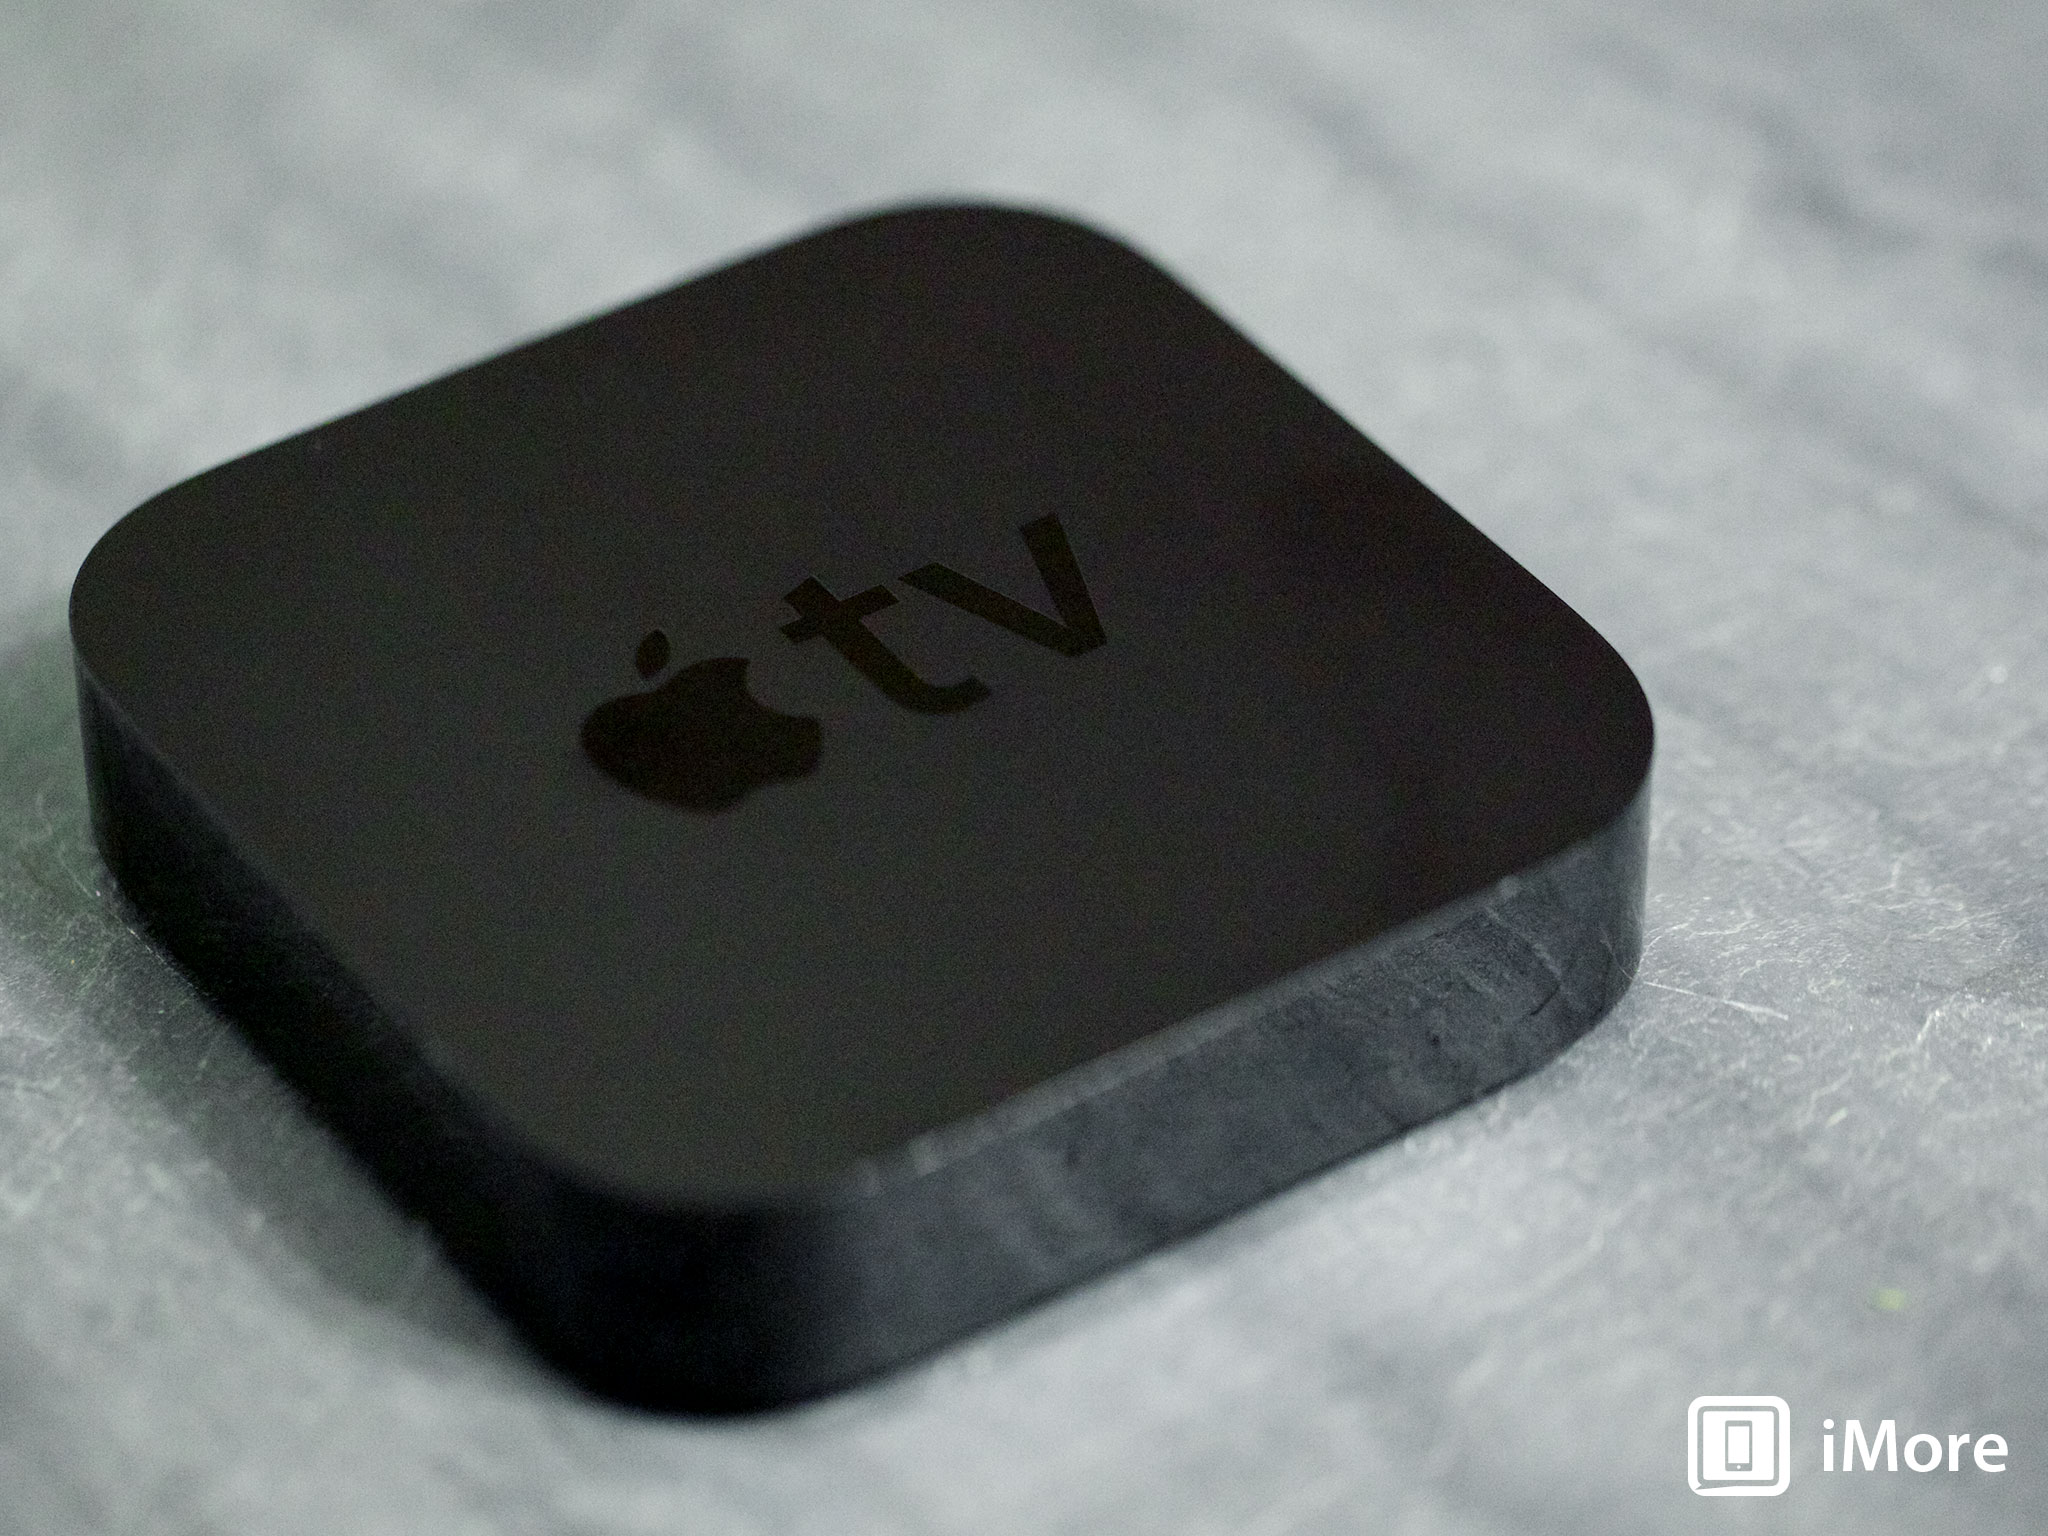 Apple TV updated, makes it easy to hide unwanted channels